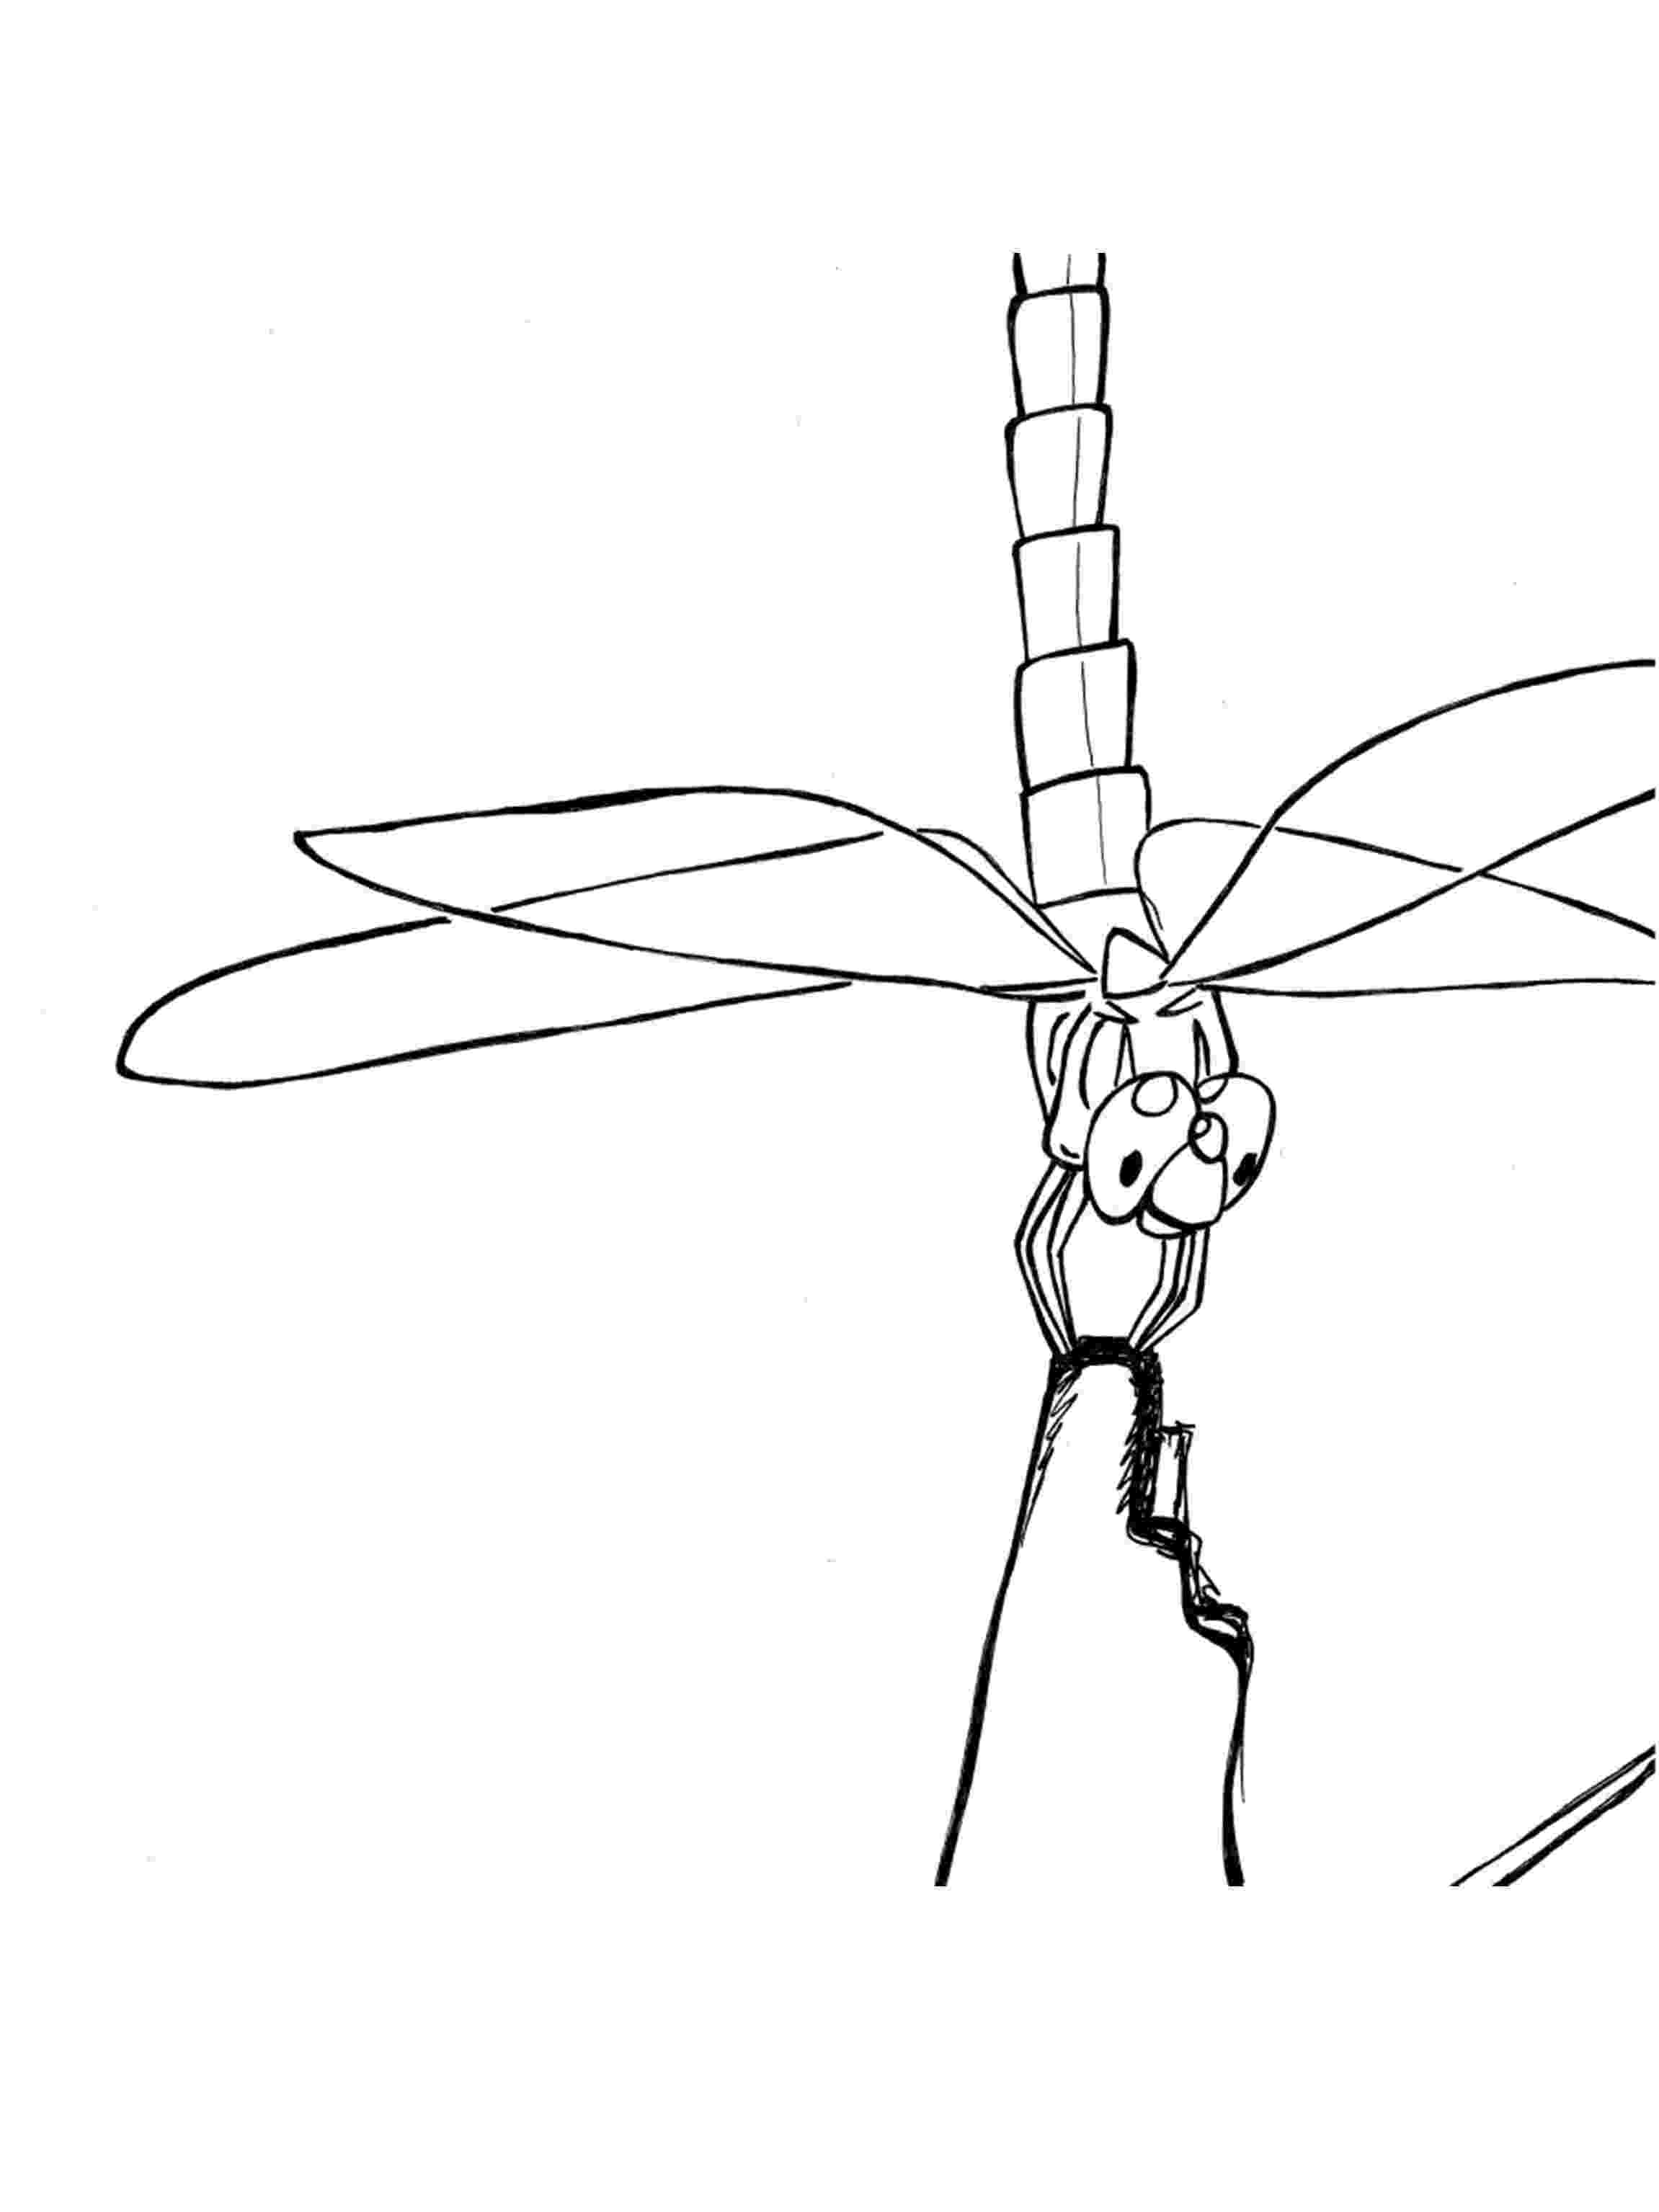 dragonfly coloring page free printable dragonfly coloring pages for kids page dragonfly coloring 